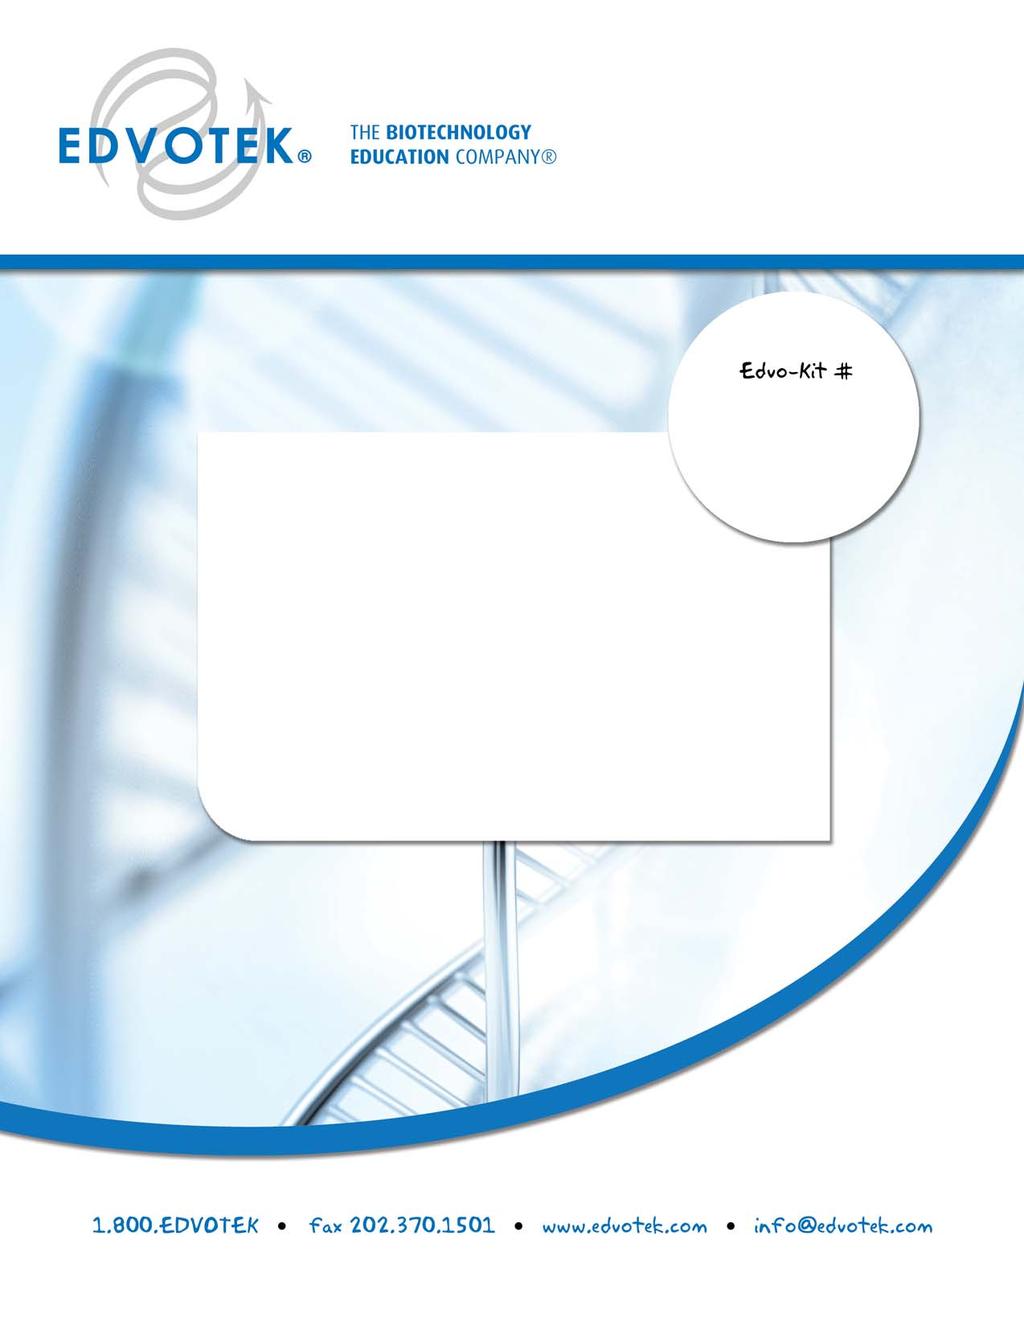 REVISED & UPDATED Edvo-Kit #345 Exploring the Genetics of Taste: SNP Analysis of the PTC Gene Using PCR Experiment Objective: The objective of this experiment is for students to isolate human DNA and